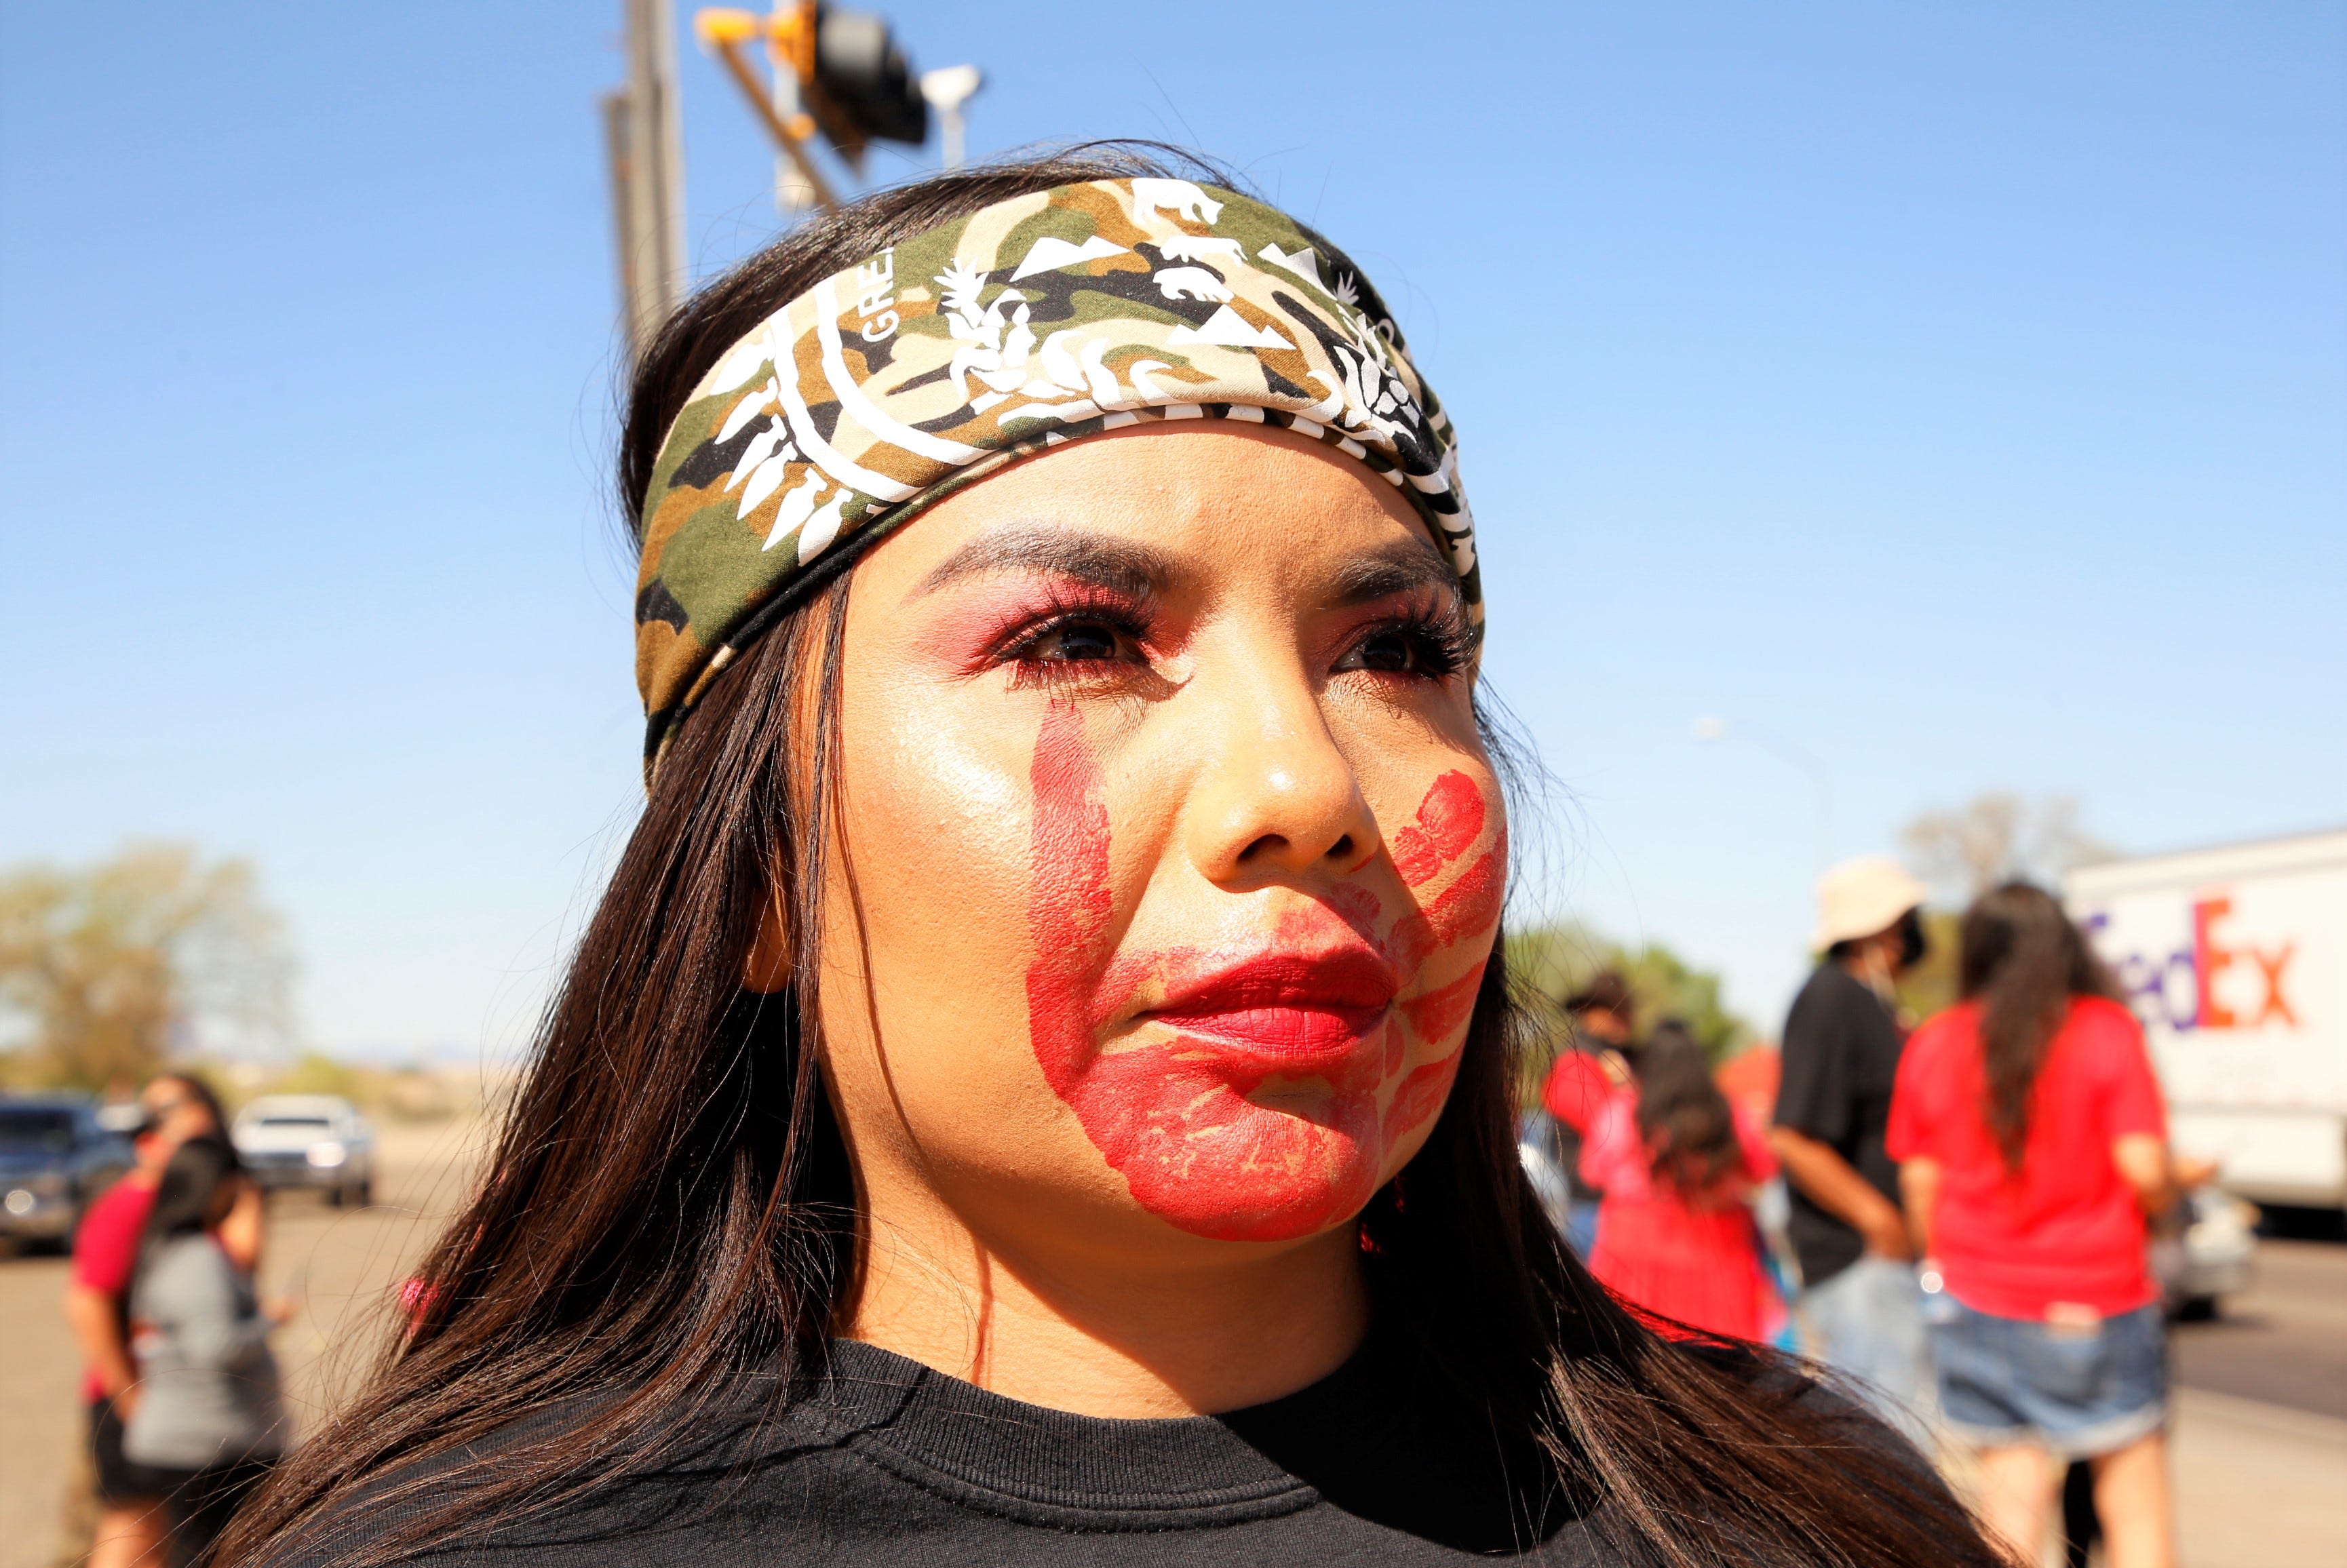 A red handprint indicating solidarity with Missing and Murdered Indigenous Women is shown on Christelle Tsosie's face during the MMIW Memorial Honor Walk on May 5 in Shiprock.